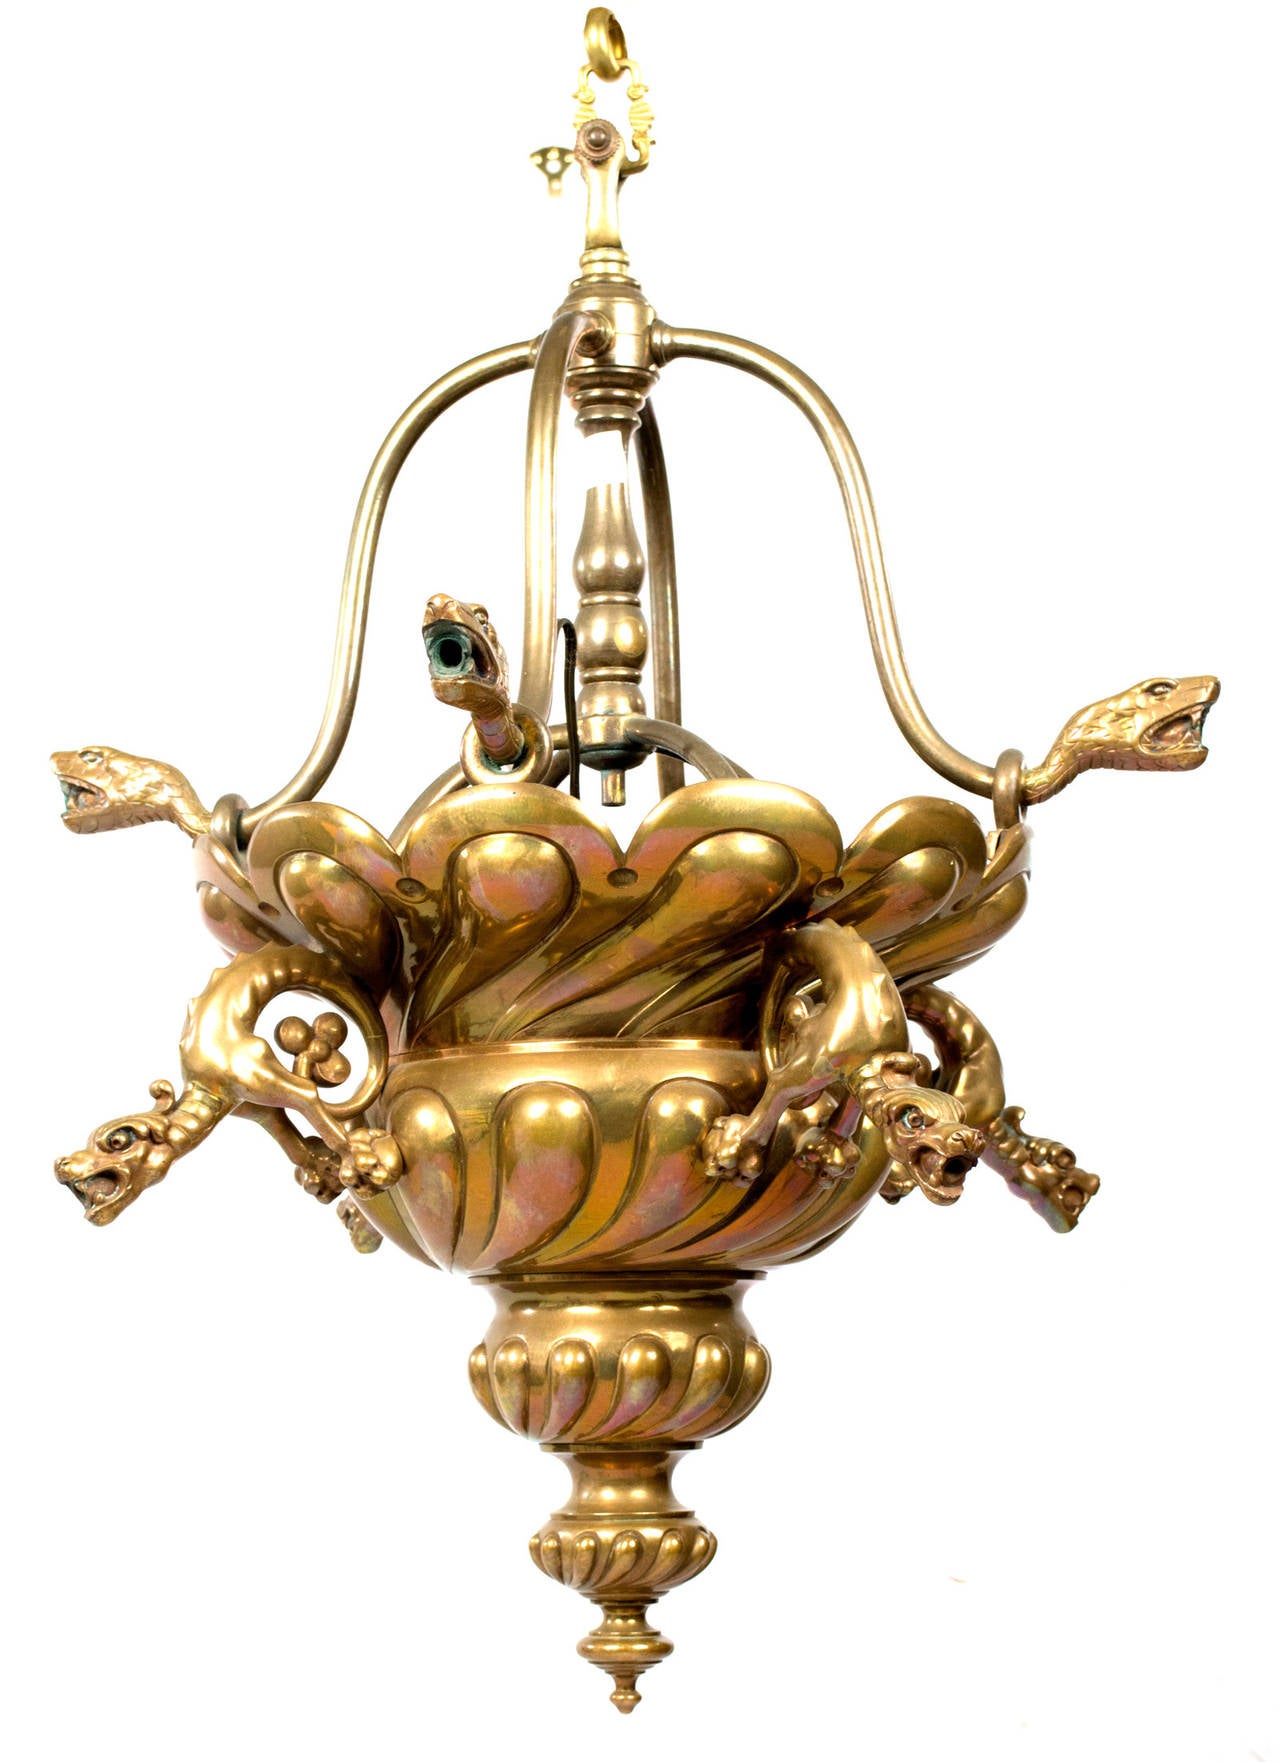 A brass pendant light with snakes and dragons, made during the last quarter of the nineteenth century and not yet wired. The light can be wired at additional cost.